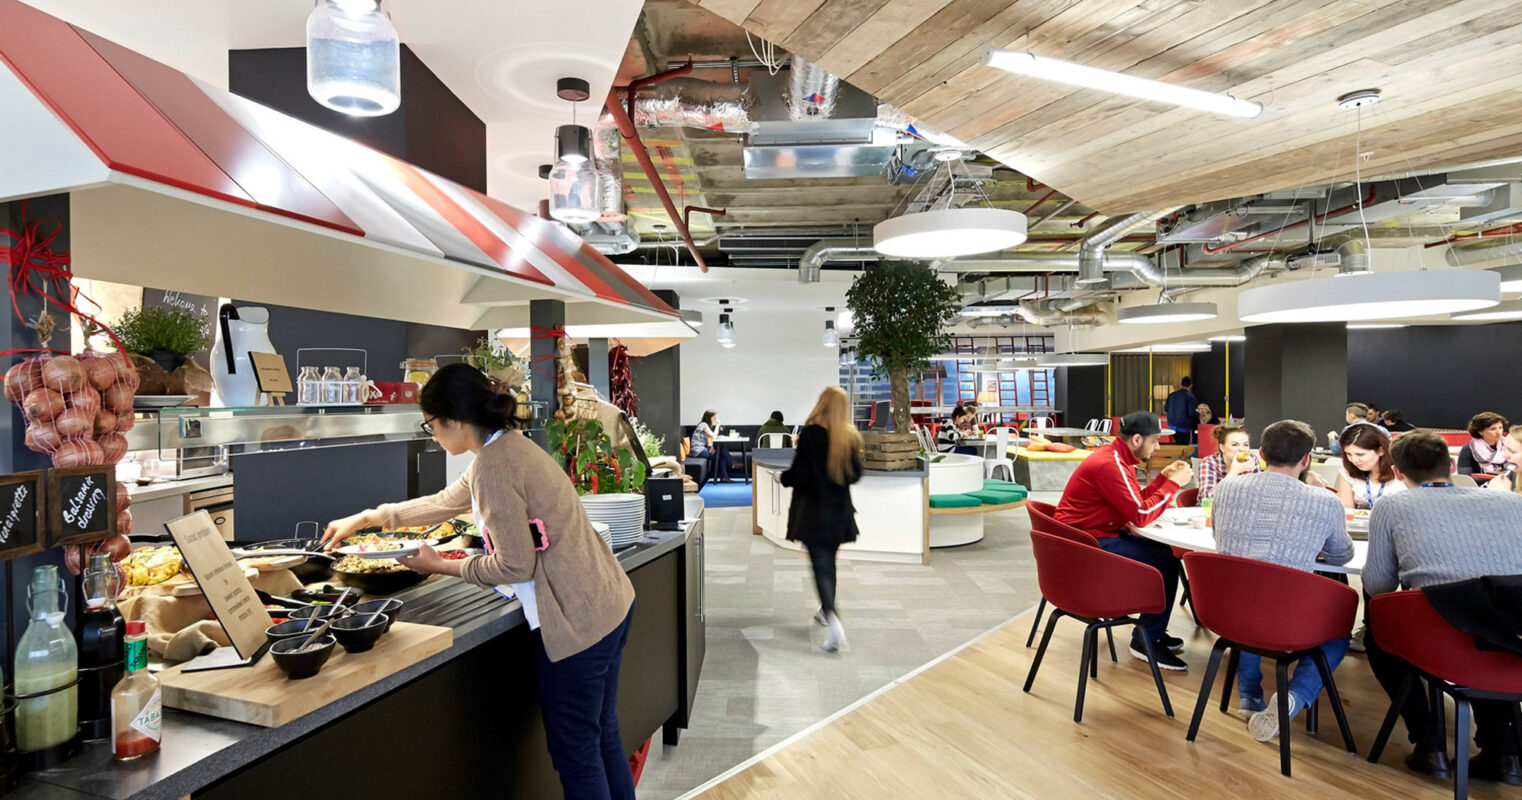 Modern office cafeteria with industrial ceiling elements, exposed ductwork, and pendant lighting. Wooden beams accentuate the ceiling, contrasting with sleek red and black seating. Employees enjoy meals at a central buffet island.